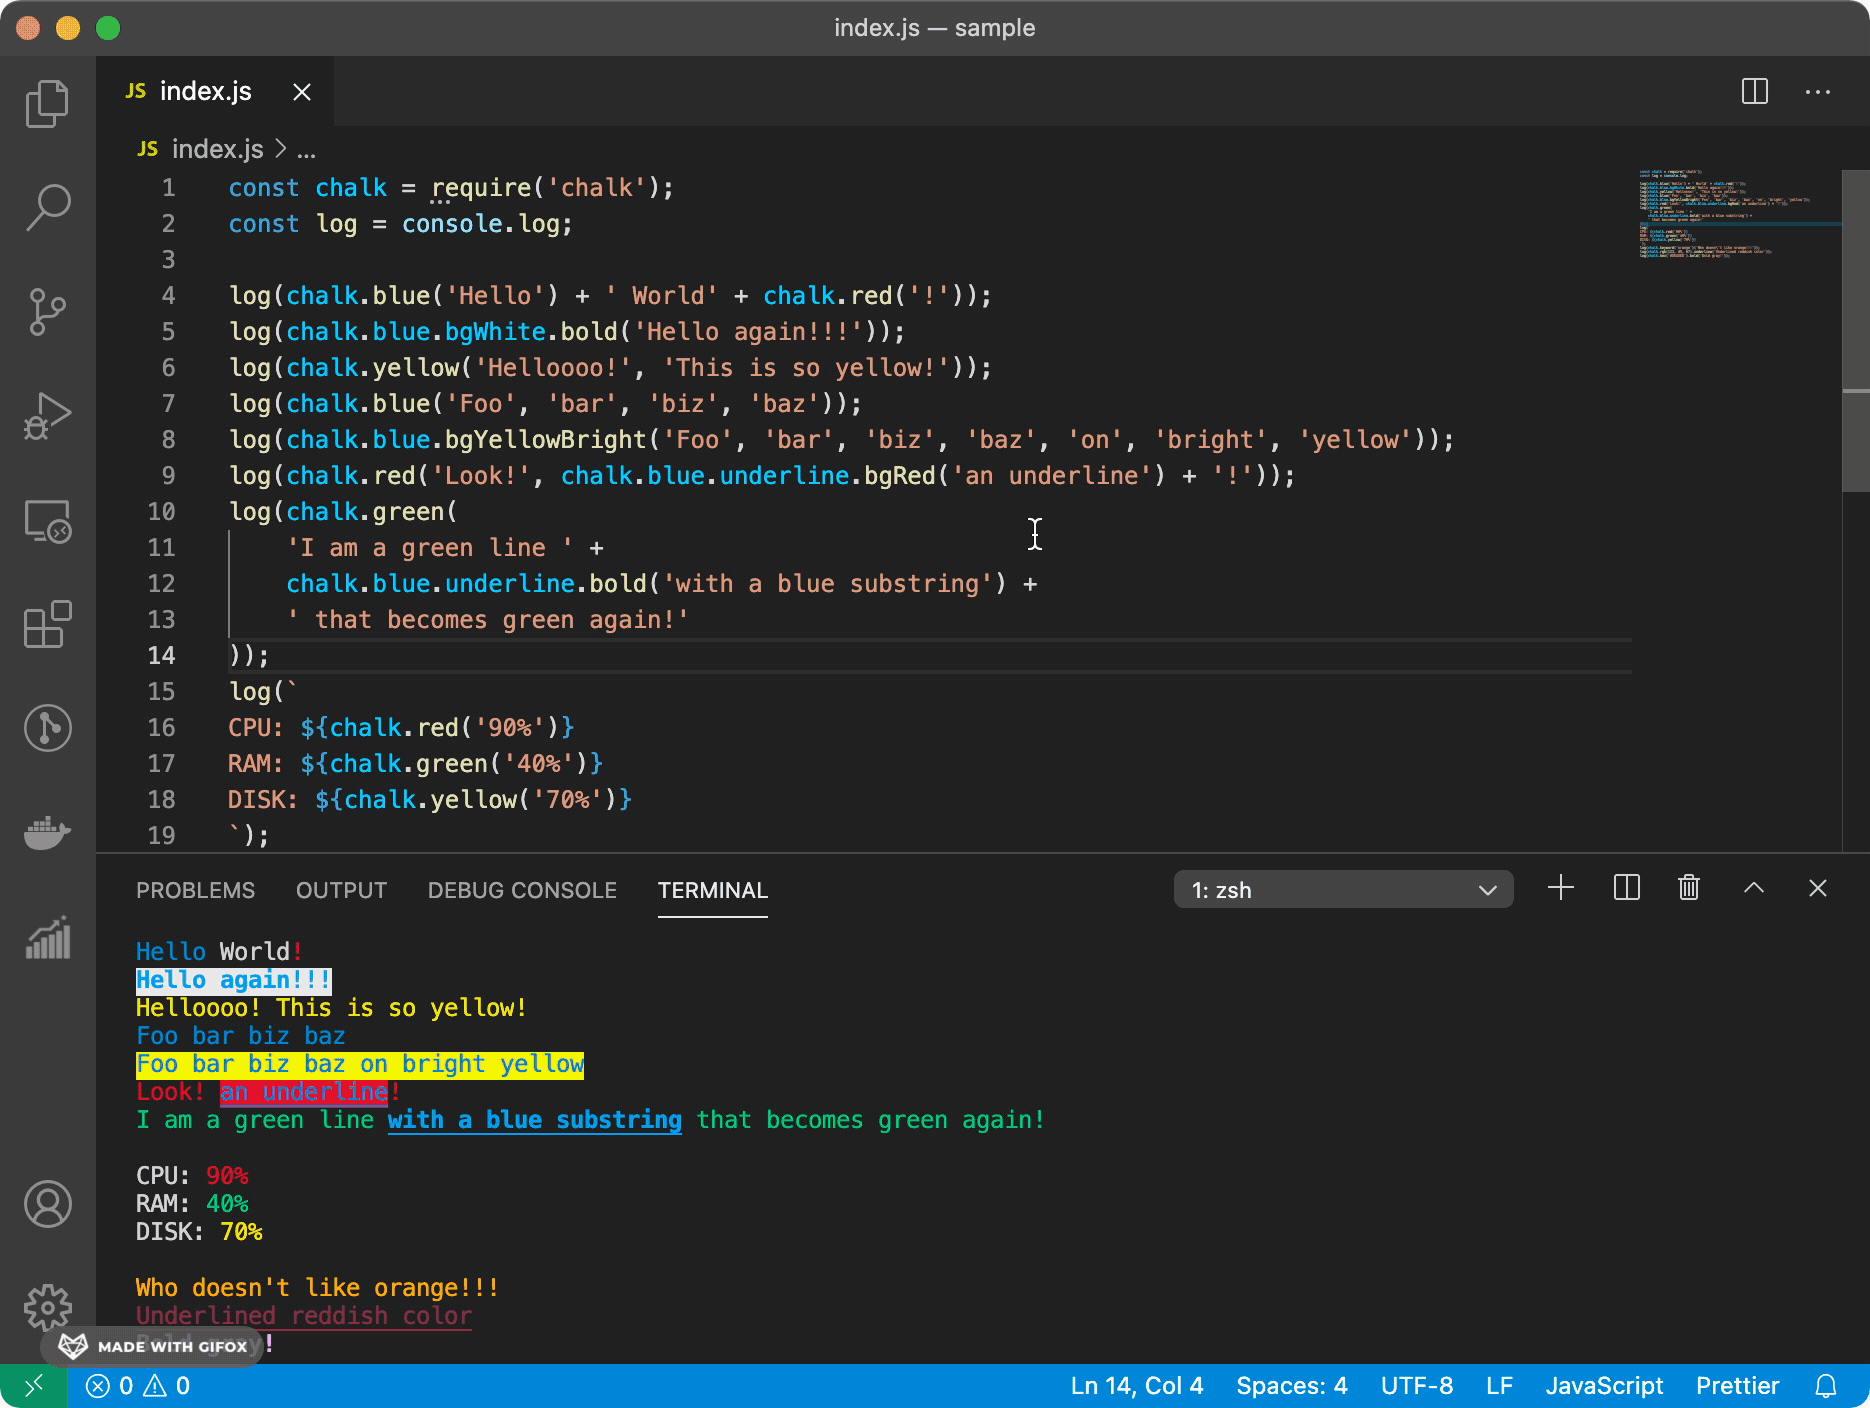 how to open visual studio code from terminal